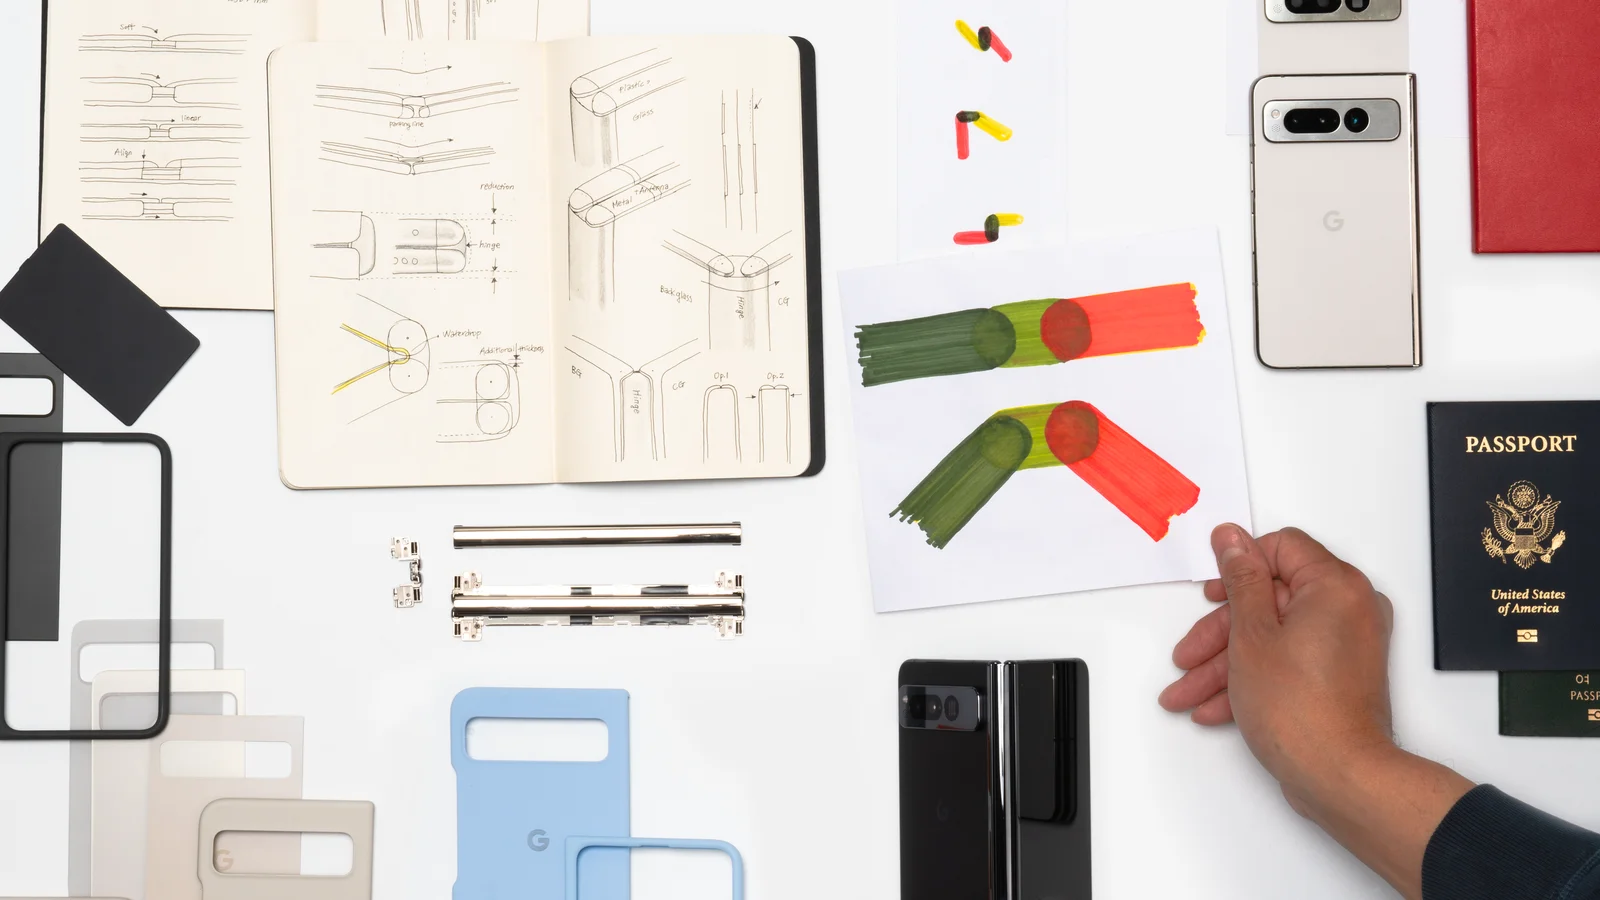 An overhead shot of various items laying on a white surface, including a passport book, a Pixel Fold, casings for the Pixel Fold in various colors, mechanical parts, two open sketch books featuring drawers of hinges. A hand is in the shot, laying down a pl